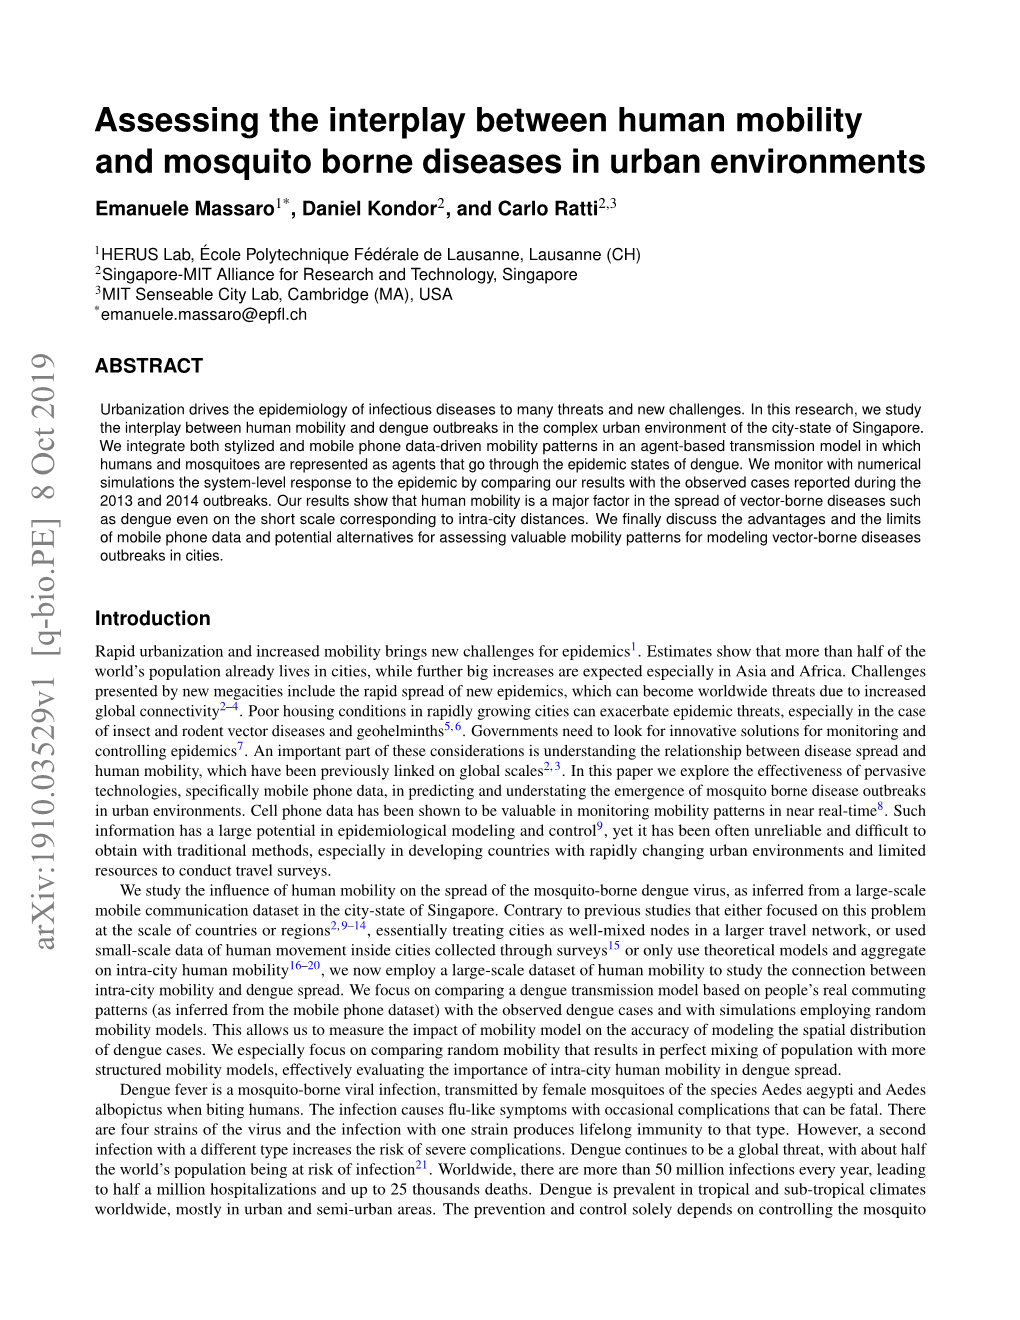 Assessing the Interplay Between Human Mobility and Mosquito Borne Diseases in Urban Environments Emanuele Massaro1*, Daniel Kondor2, and Carlo Ratti2,3